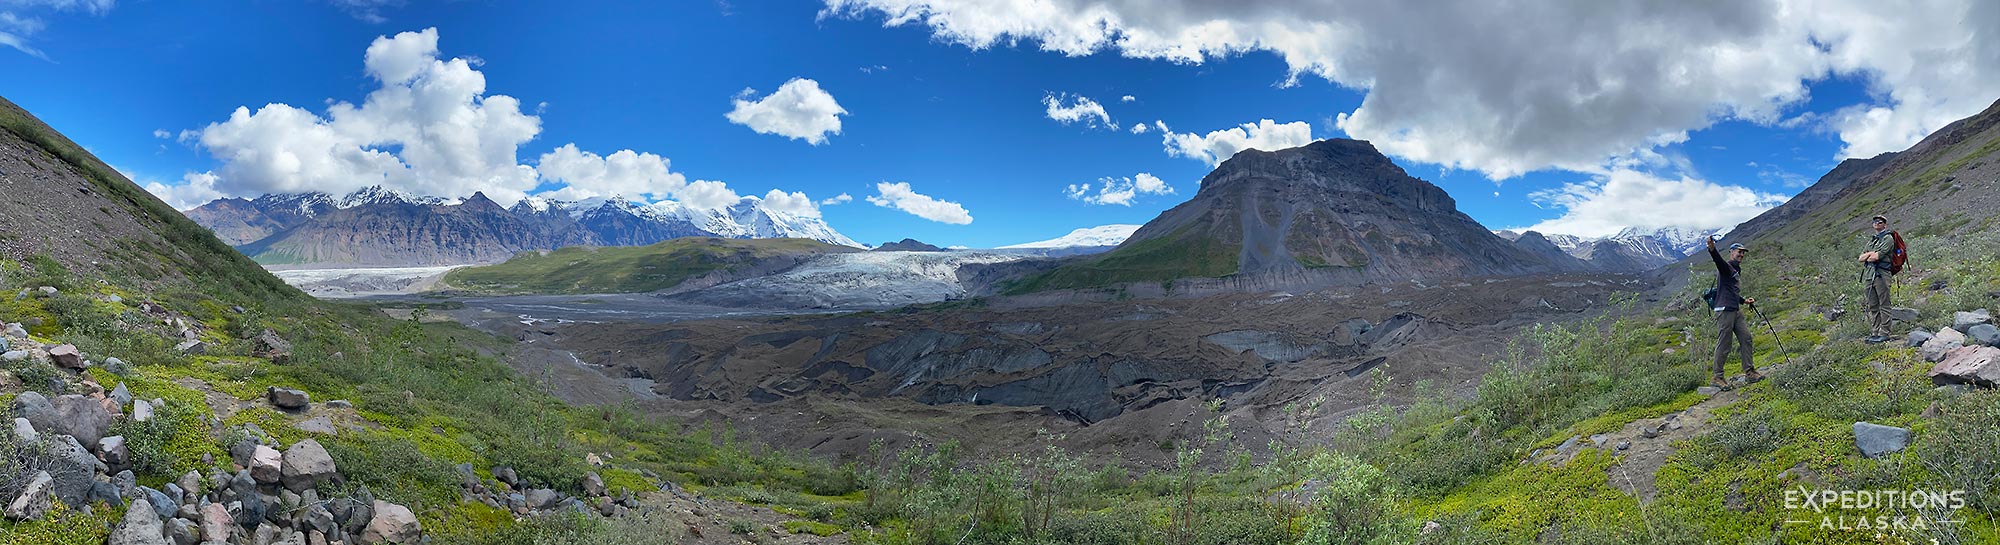 The Heart of the Park, Wrangell St. Elias National Park backpacking trip.